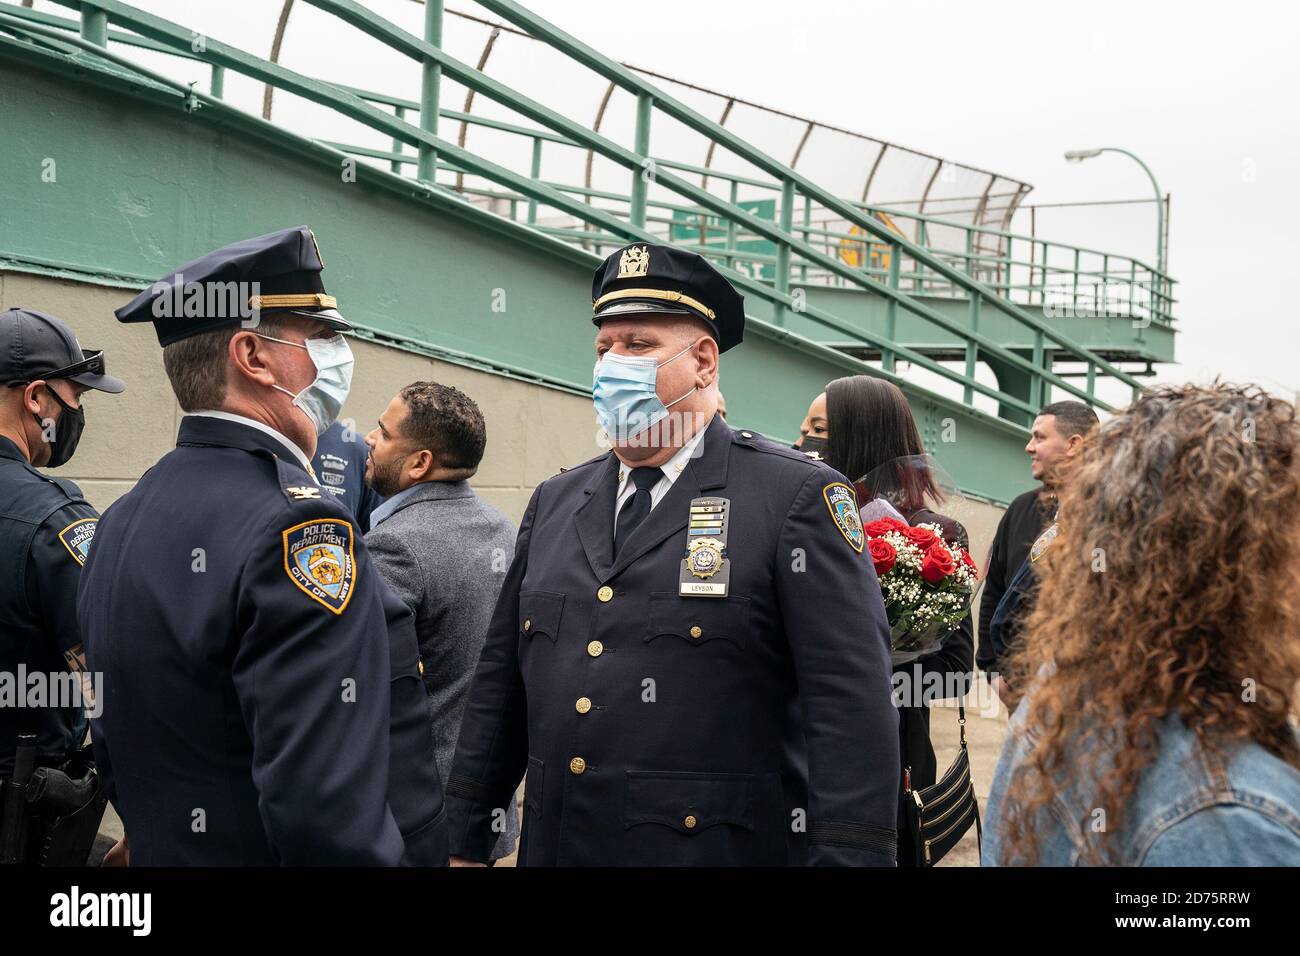 Family members and police officers attend bridge name dedication and plaque installation in memory of Randolph Holder in Harlem. Pedestrian footbridge over Franklin D. Roosevelt Drive at 120th Street where officer Holder was killed in 2015 connects Harlem streets and public bike and walkway along Harlem river. Randolph Holder was posthumously promoted from the rank of officer to the rank of Detective. Detective Randolph Holder was shot and killed while pursuing an armed male subject. (Photo by Lev Radin/Pacific Press) Stock Photo